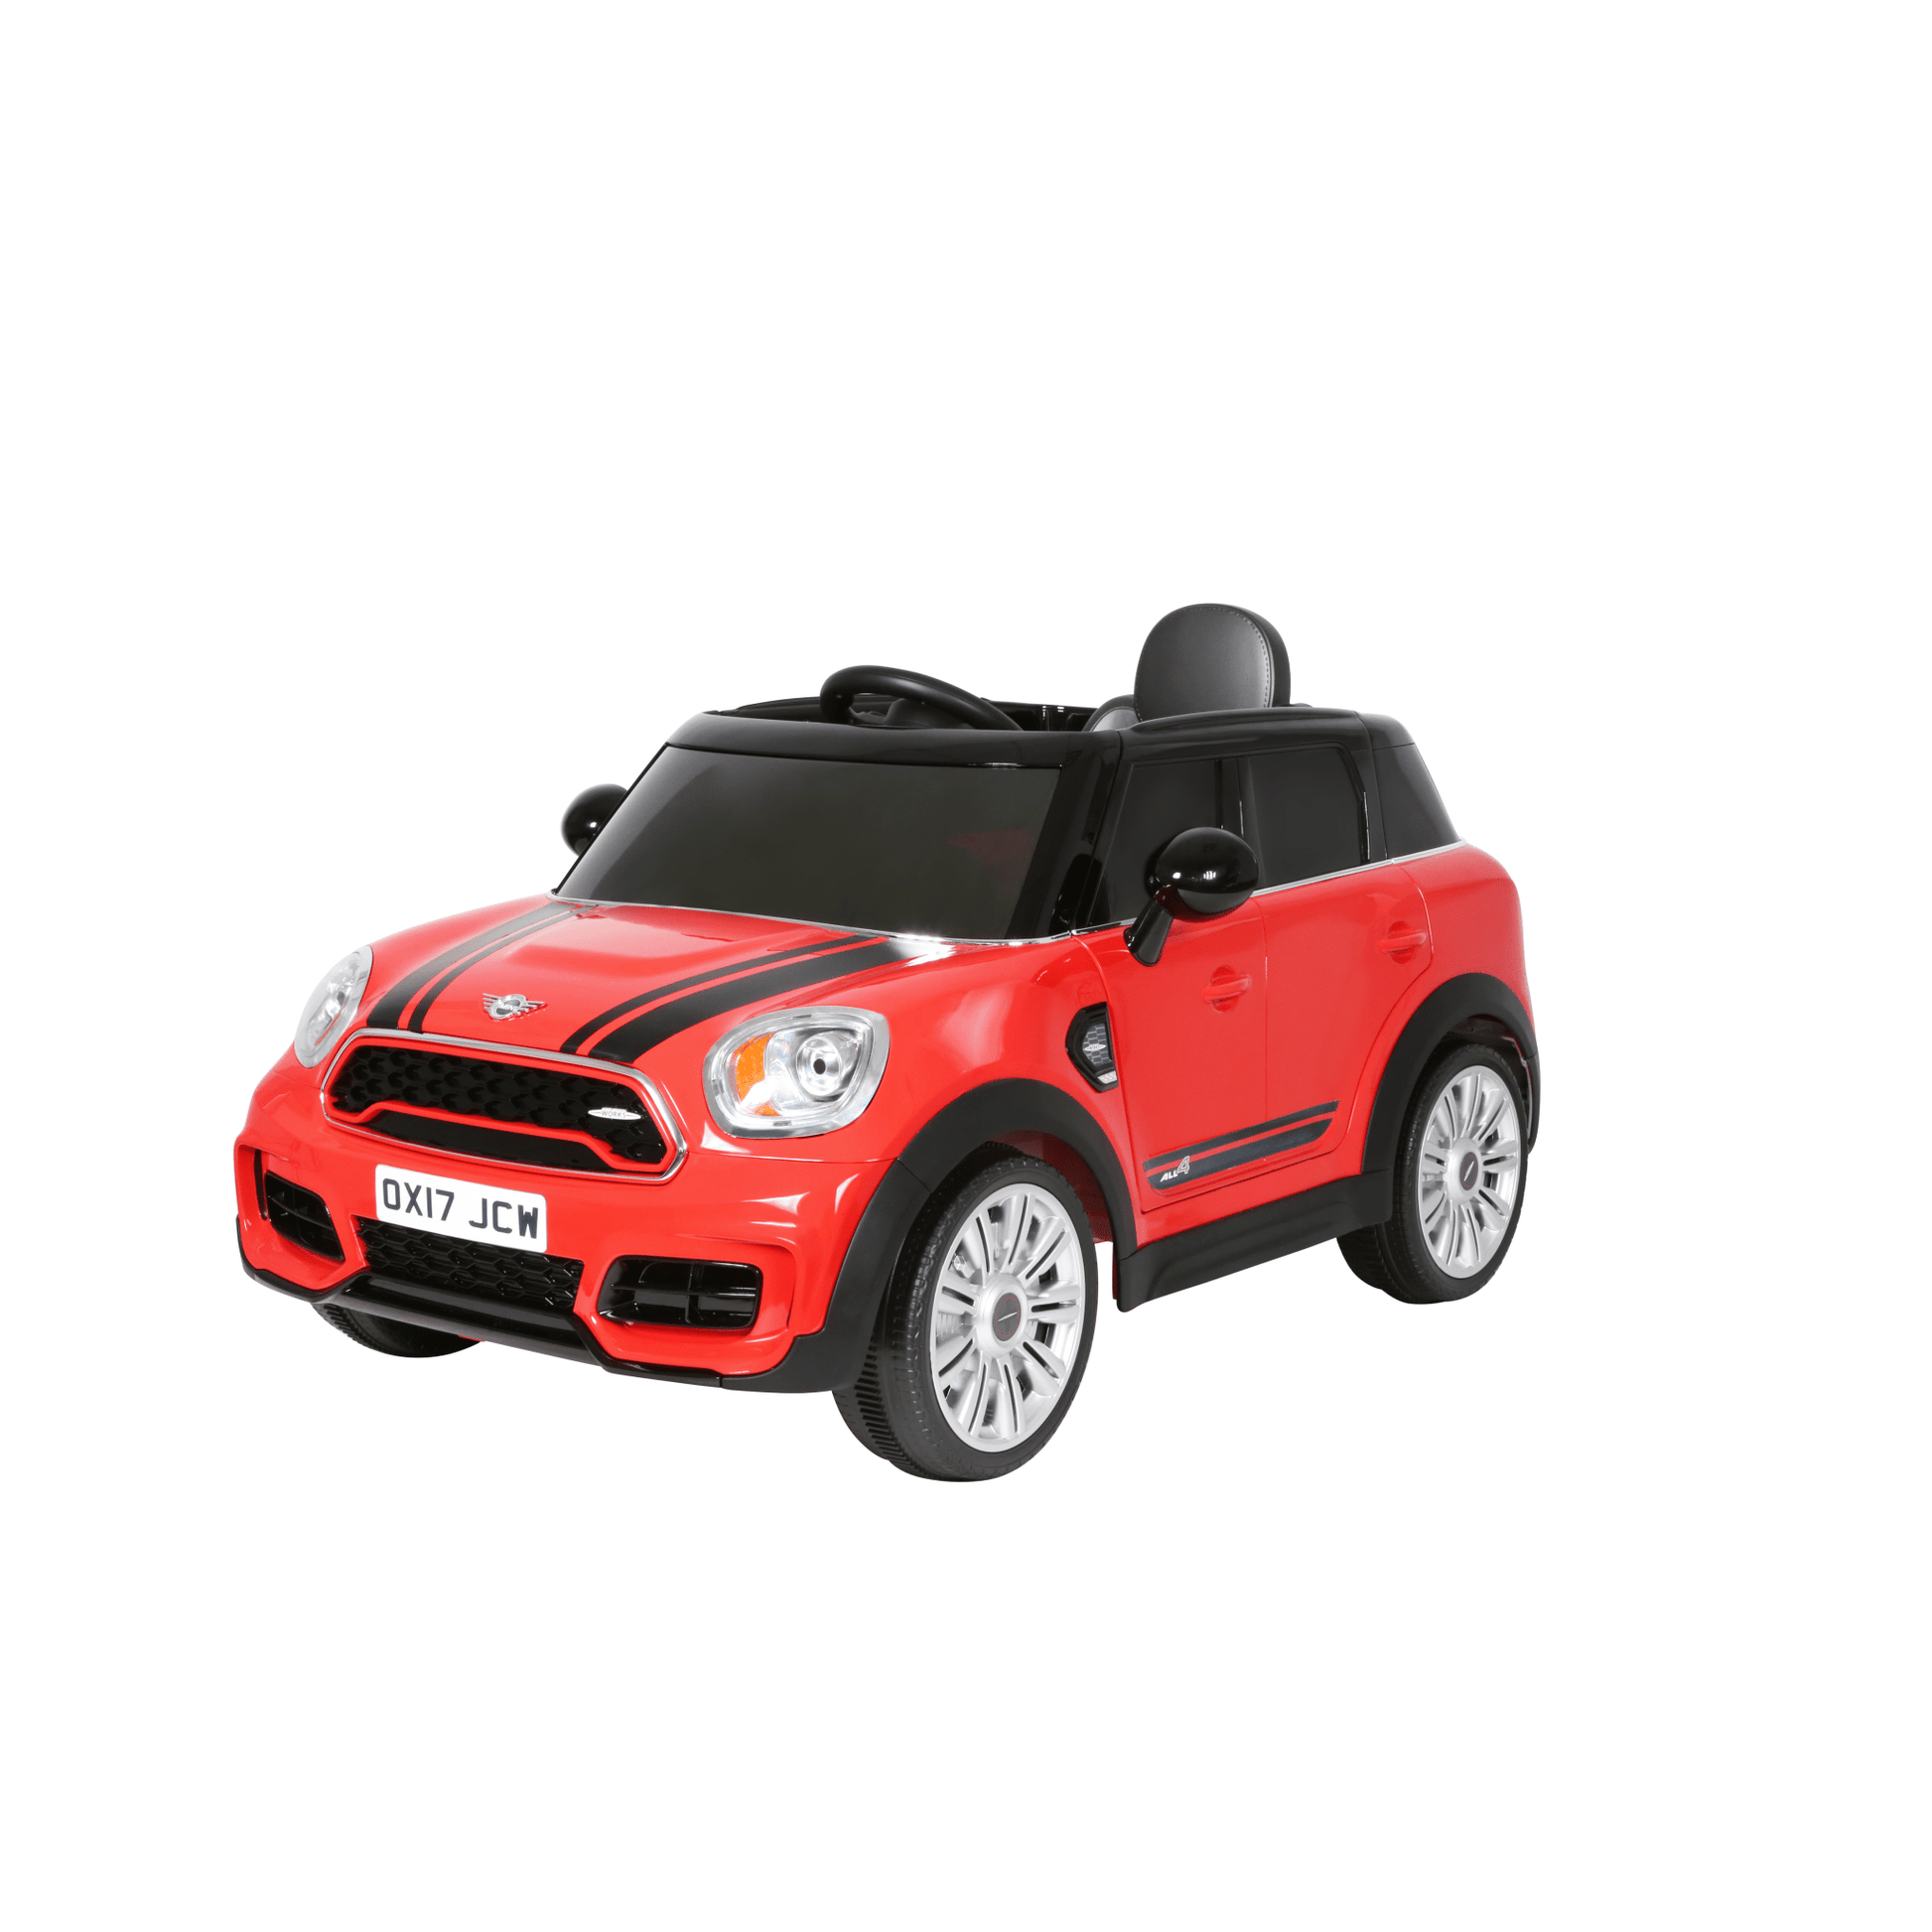 Mini Countryman 6 Volt Car with Remote Control - Red - The Online Toy Shop - Powered Car - 5